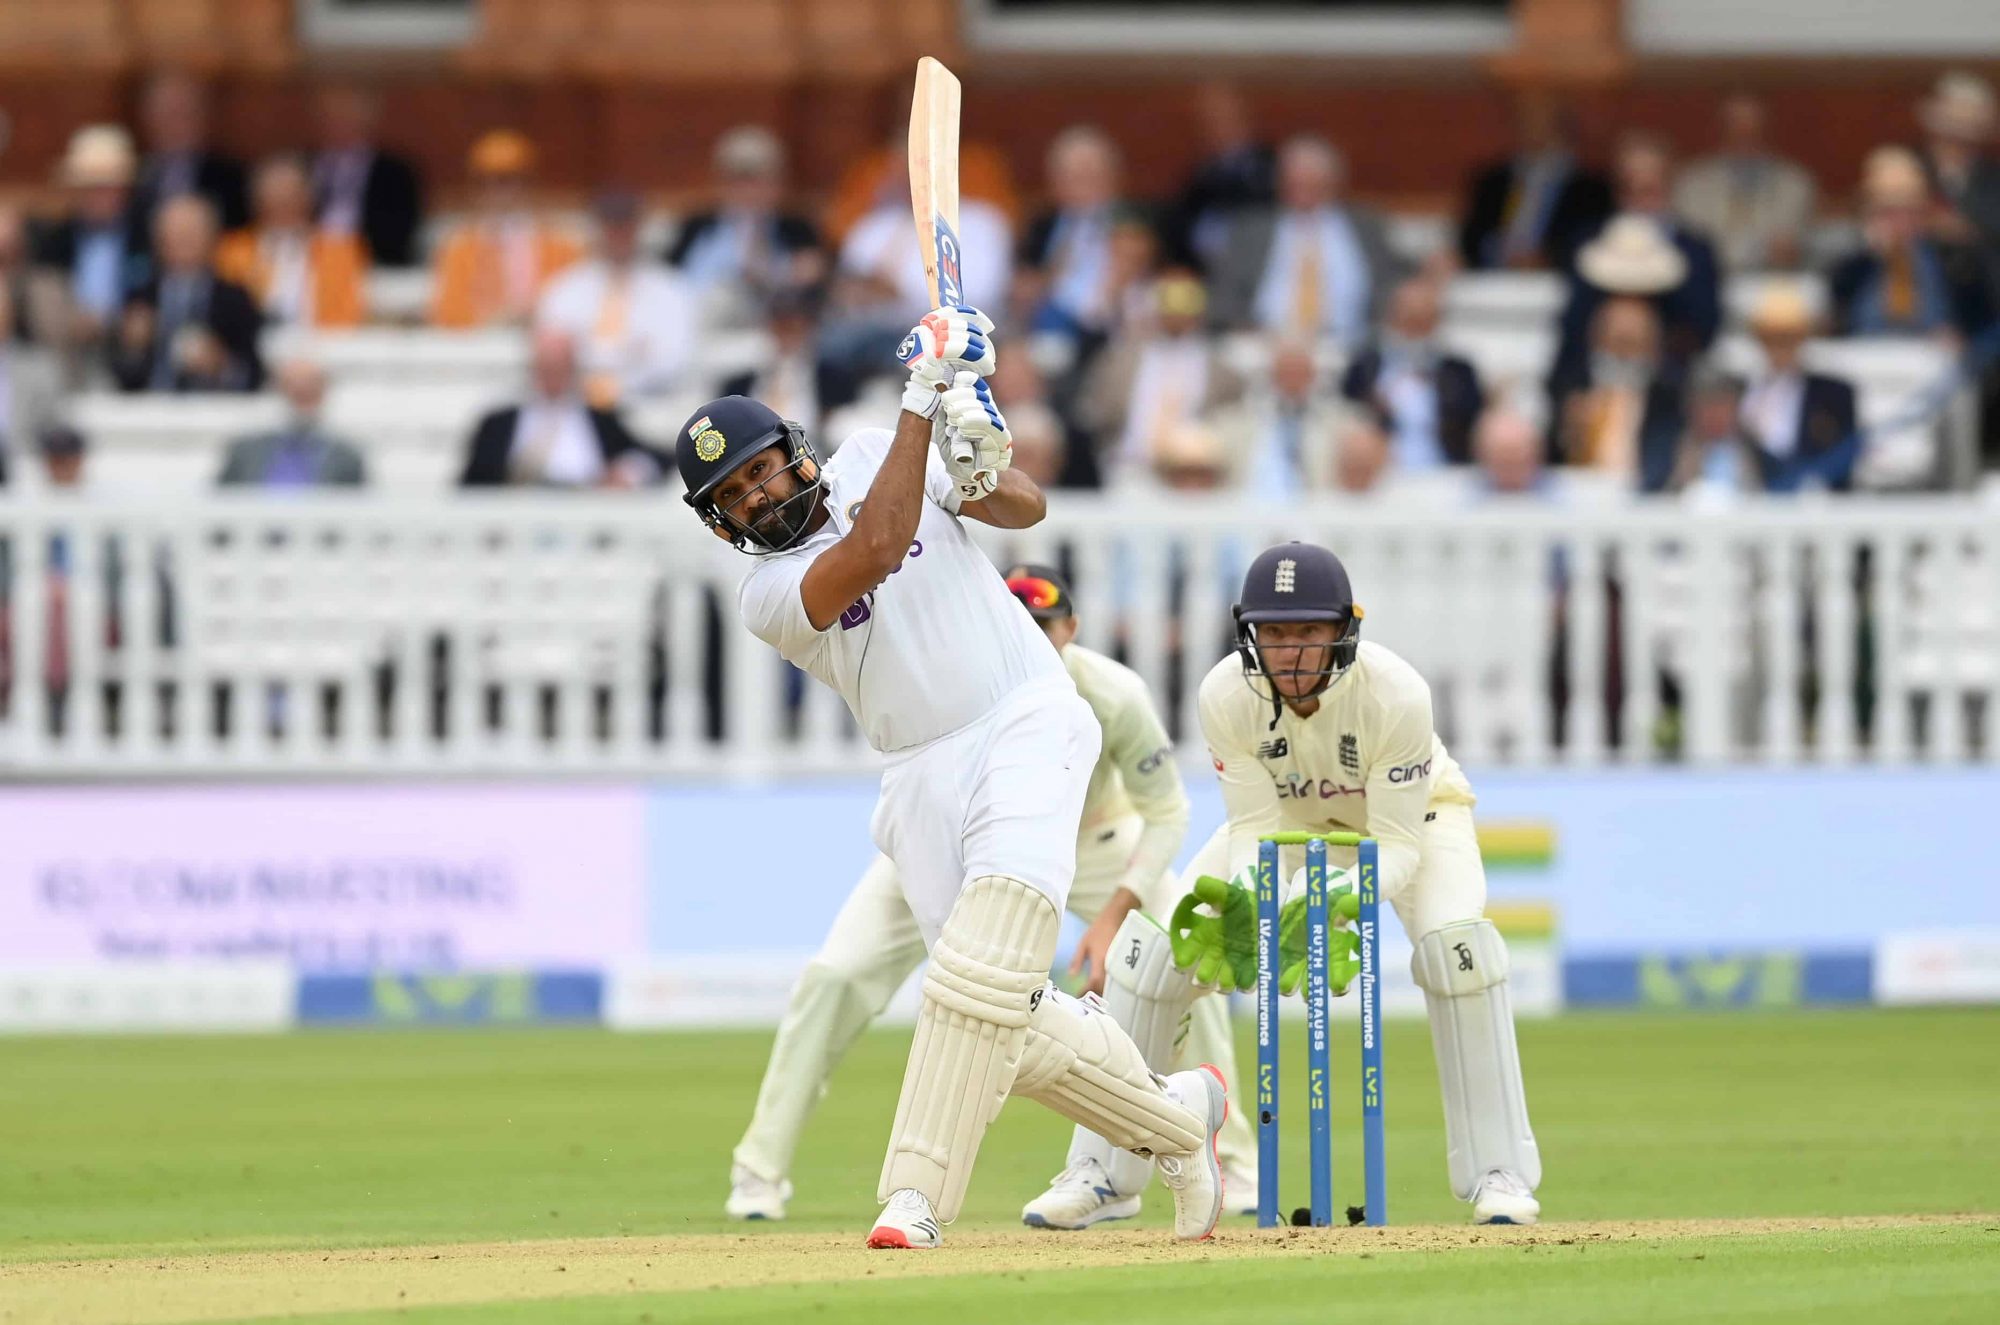 ENG vs IND: Rohit Sharma Becomes Second Opener To Claim THIS Record After Rahul Dravid